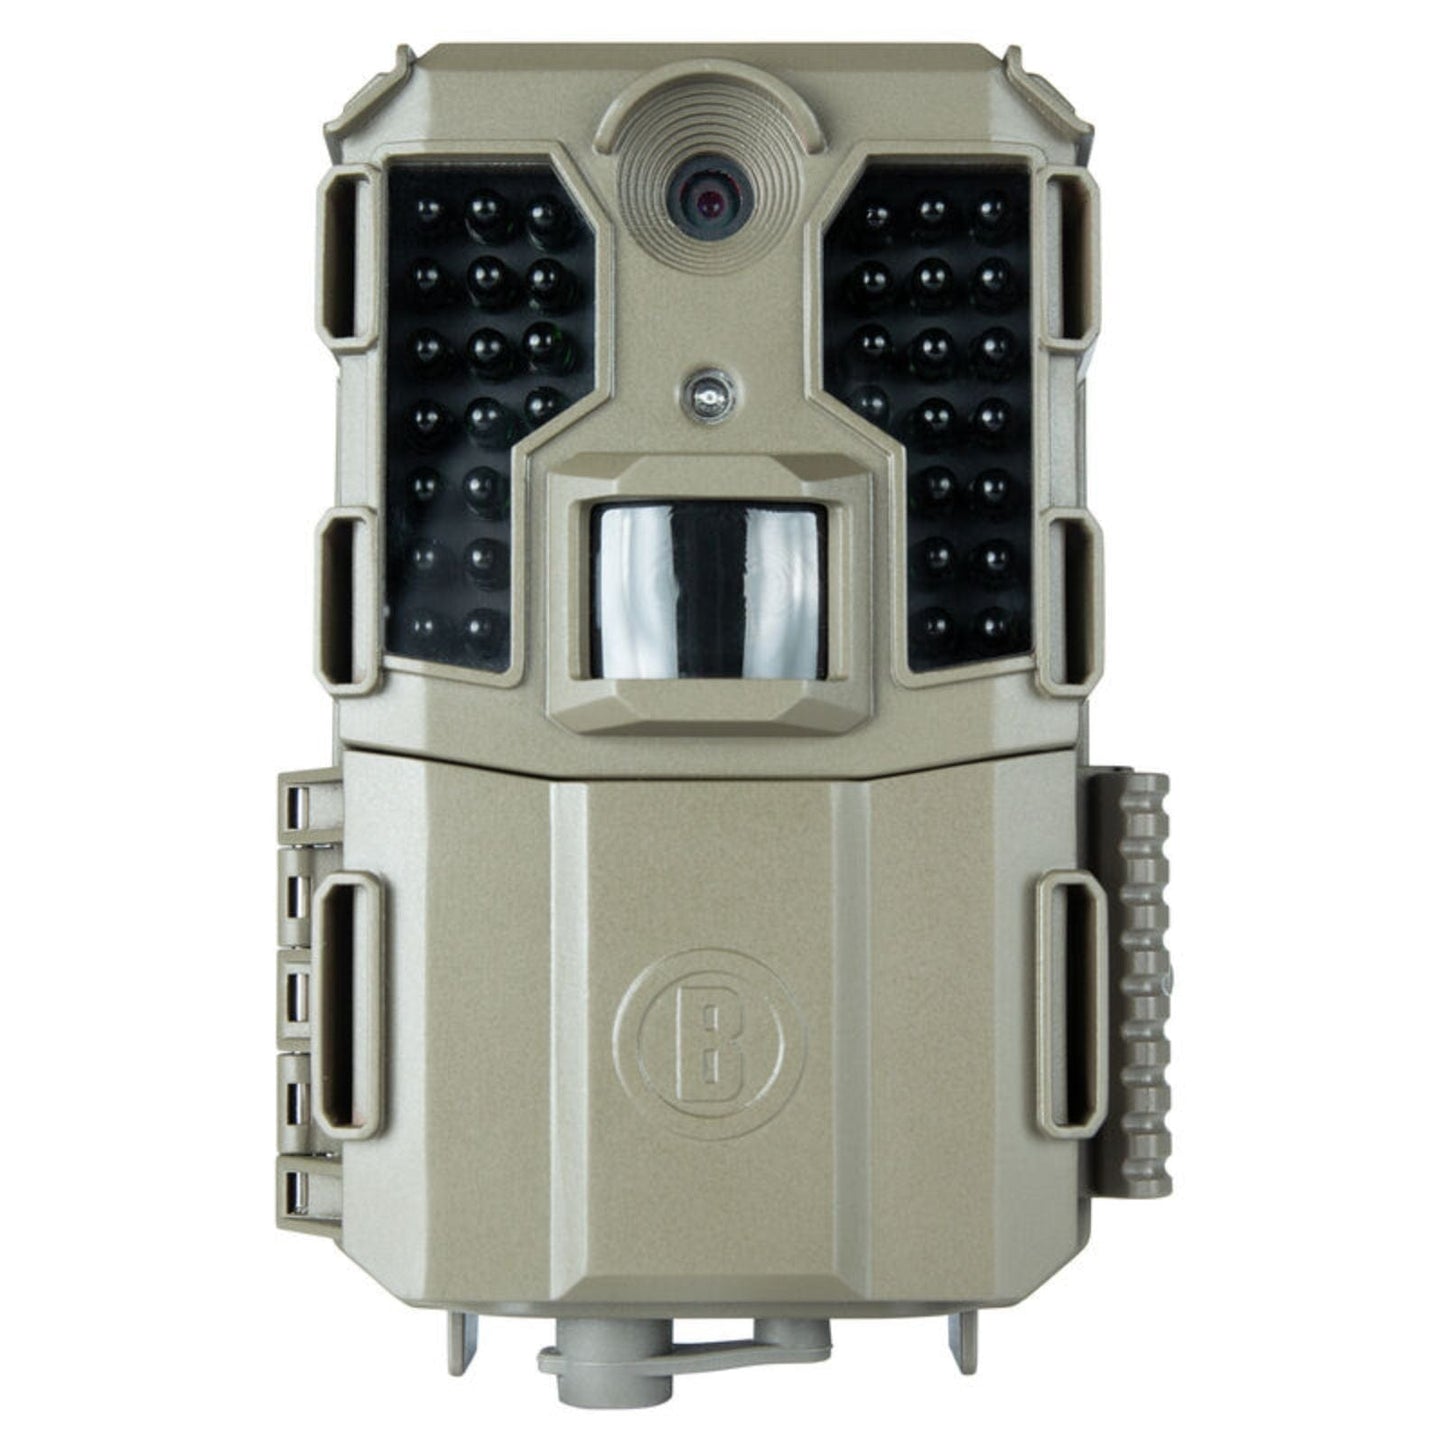 Bushnell 20MP Prime L20 Tan Low Glow Trail Camera by Texas Fowlers